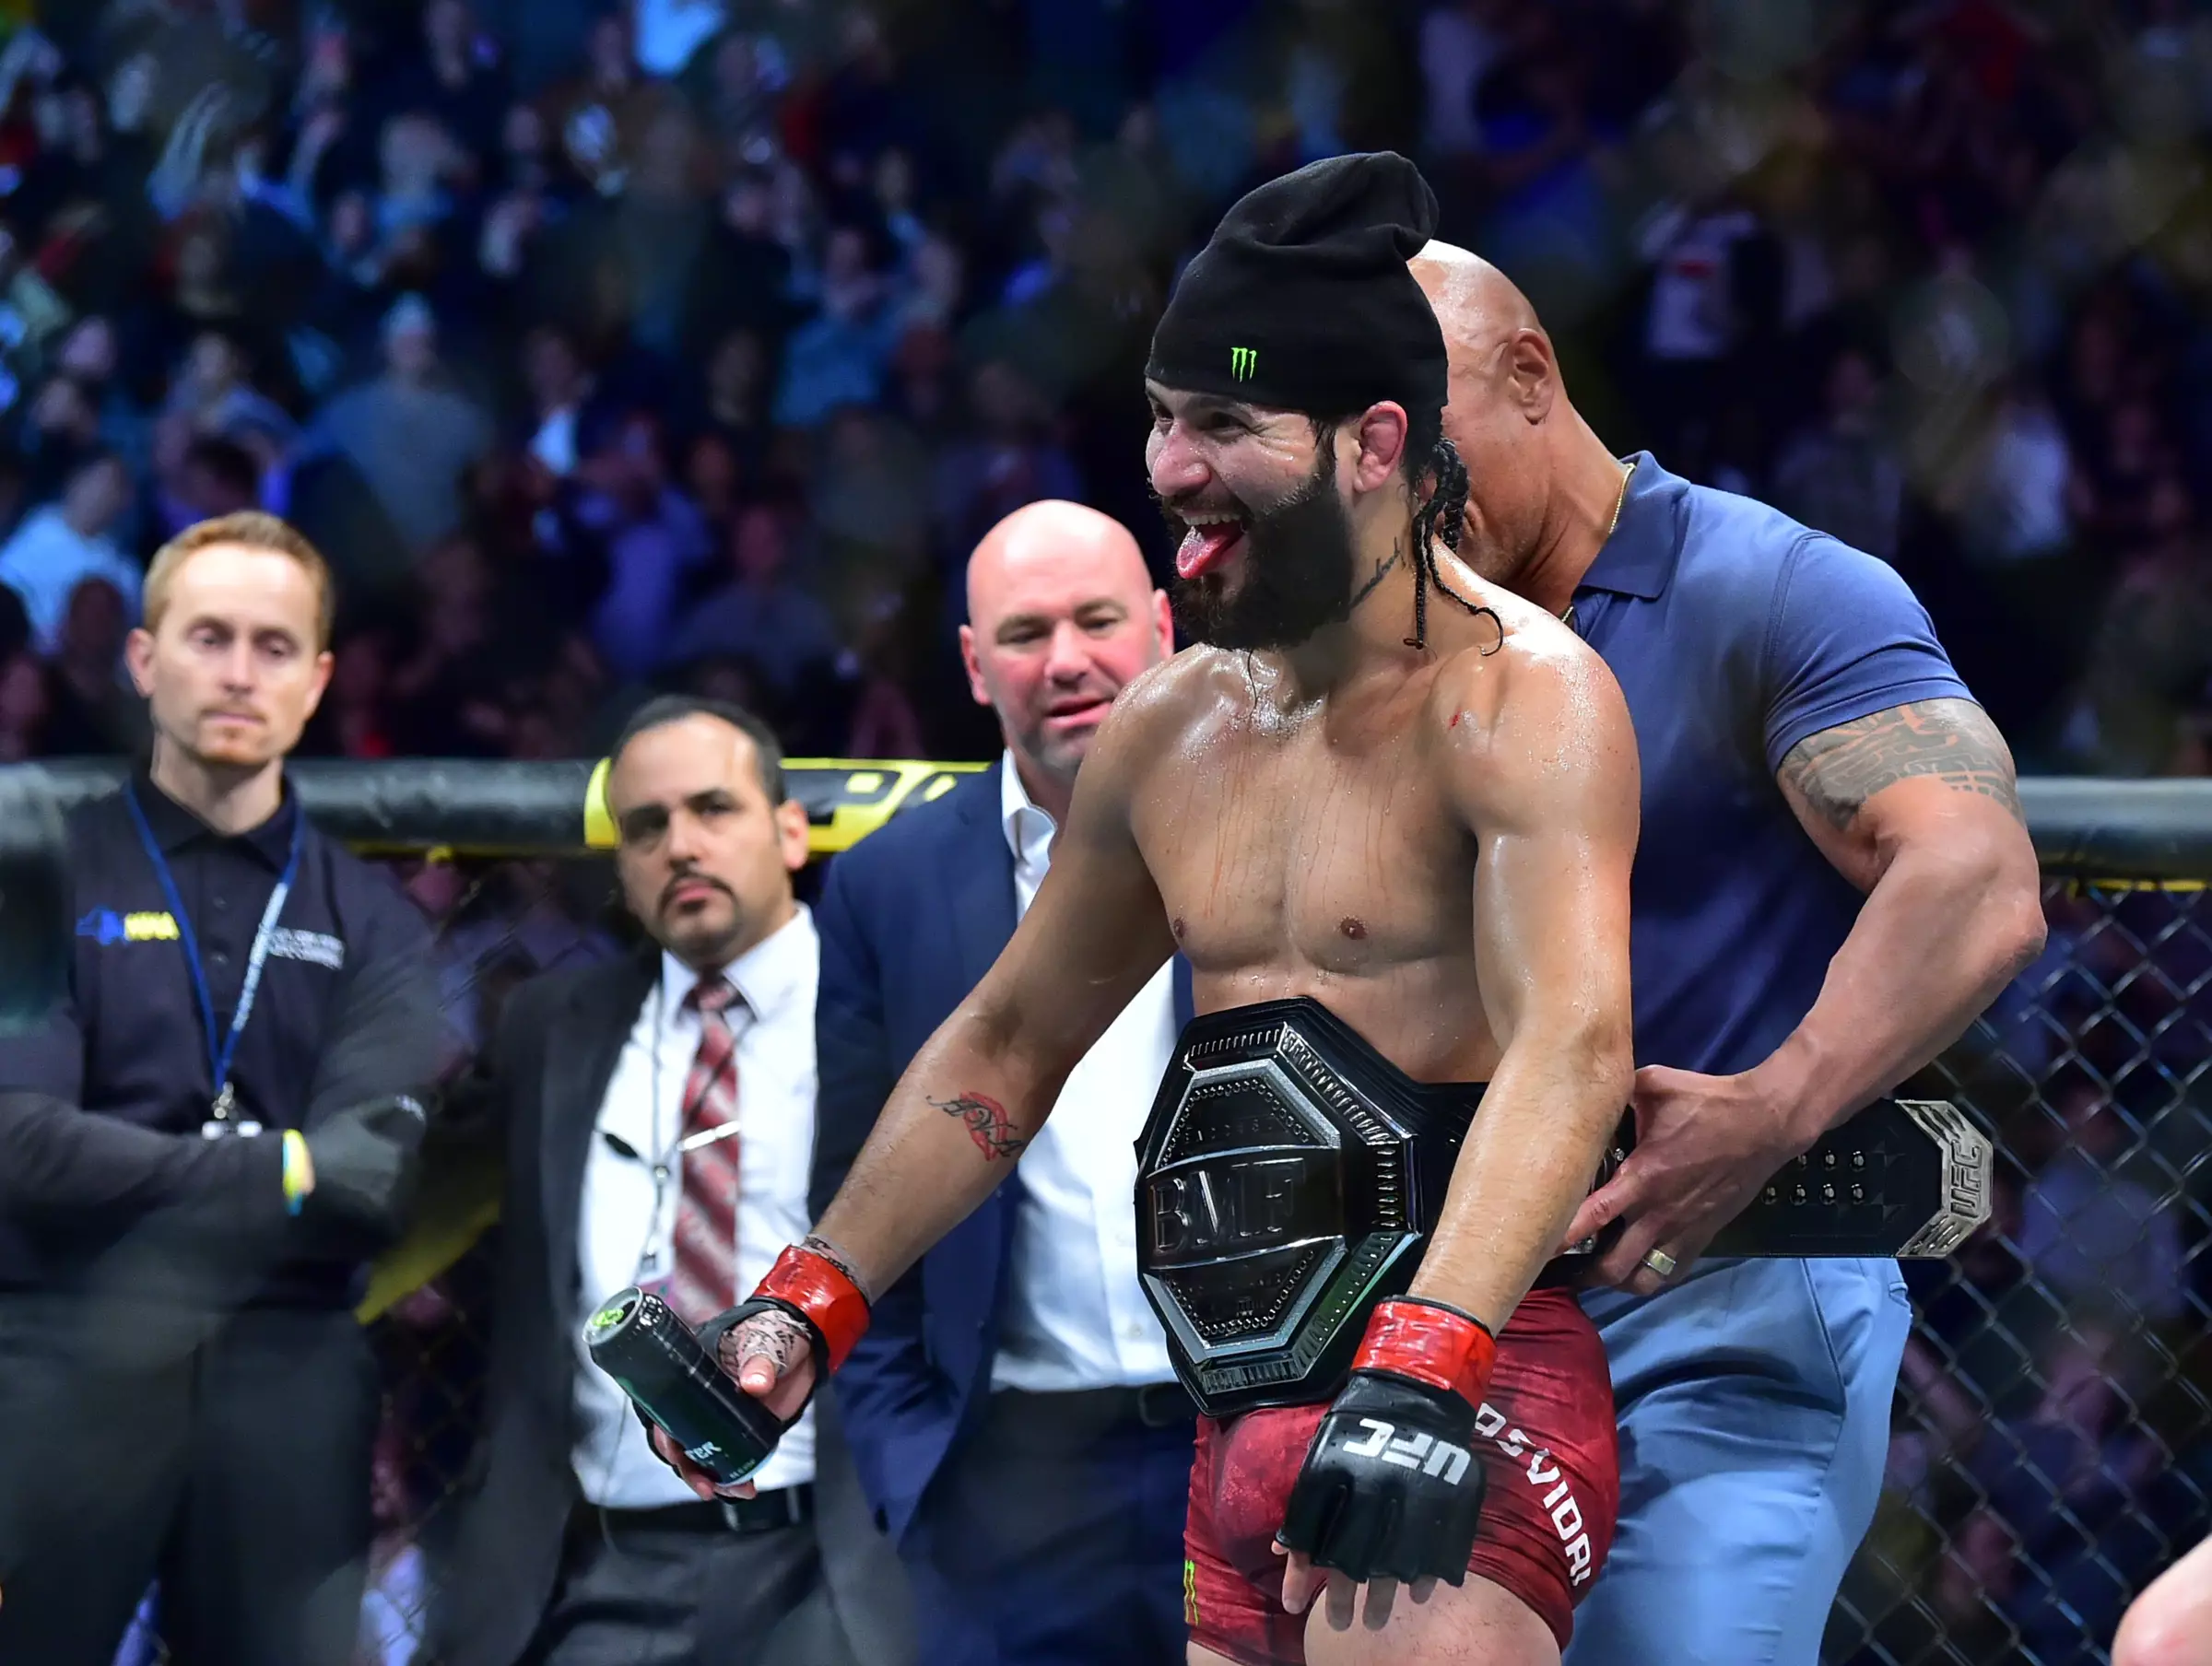 Masvidal won the BMF title over Nate Diaz.